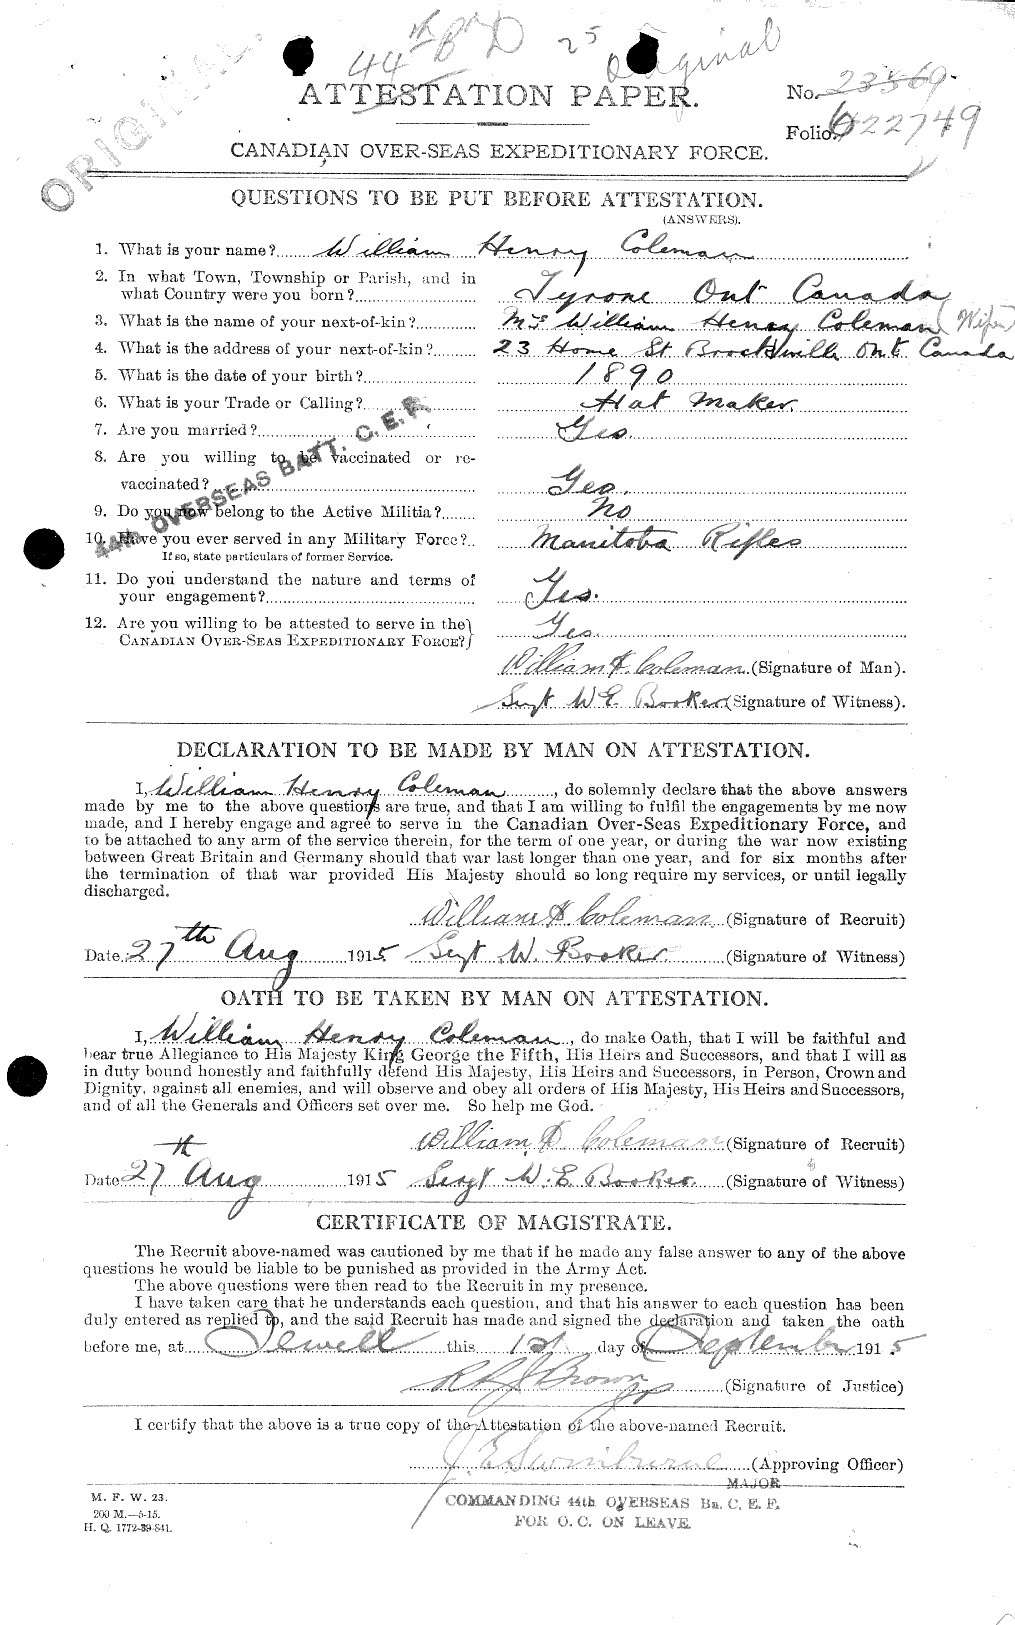 Personnel Records of the First World War - CEF 028315c